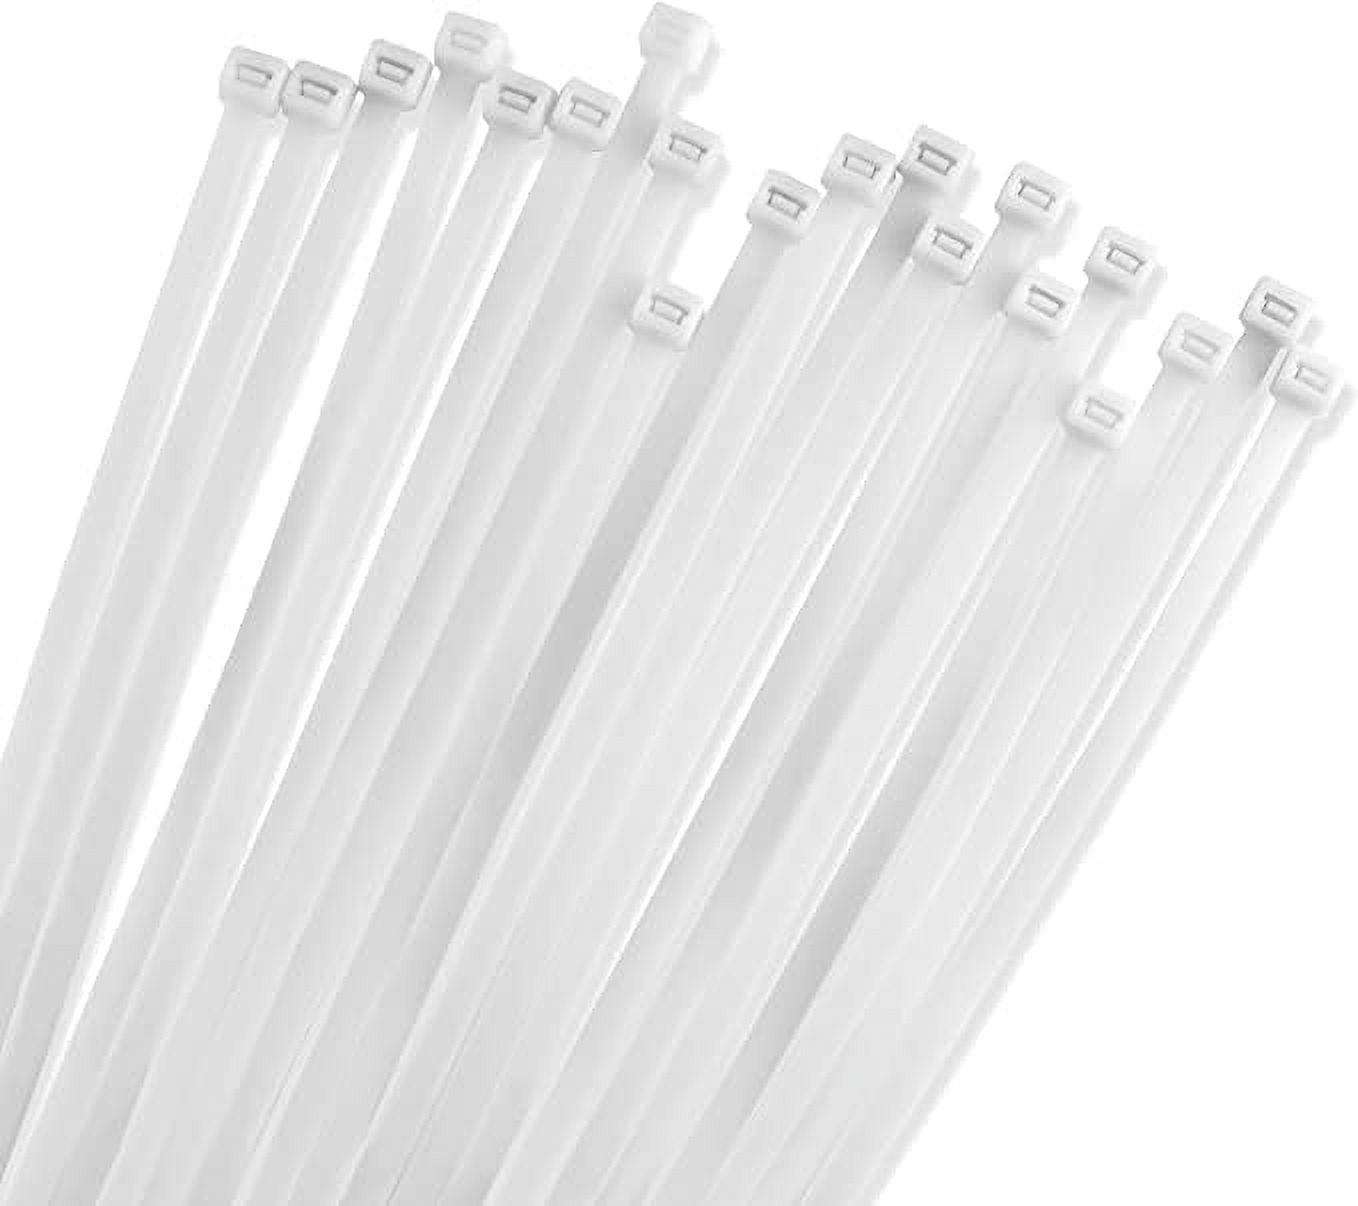  Set of 300 Ultra Strong 0.2 Inch Width Cable Ties and Cable Tie  Mounts, SourceTon 100 PCS 8 Inch Cable Zip Ties, 100 PCS 12 Inch Cable Zip  Ties & 100